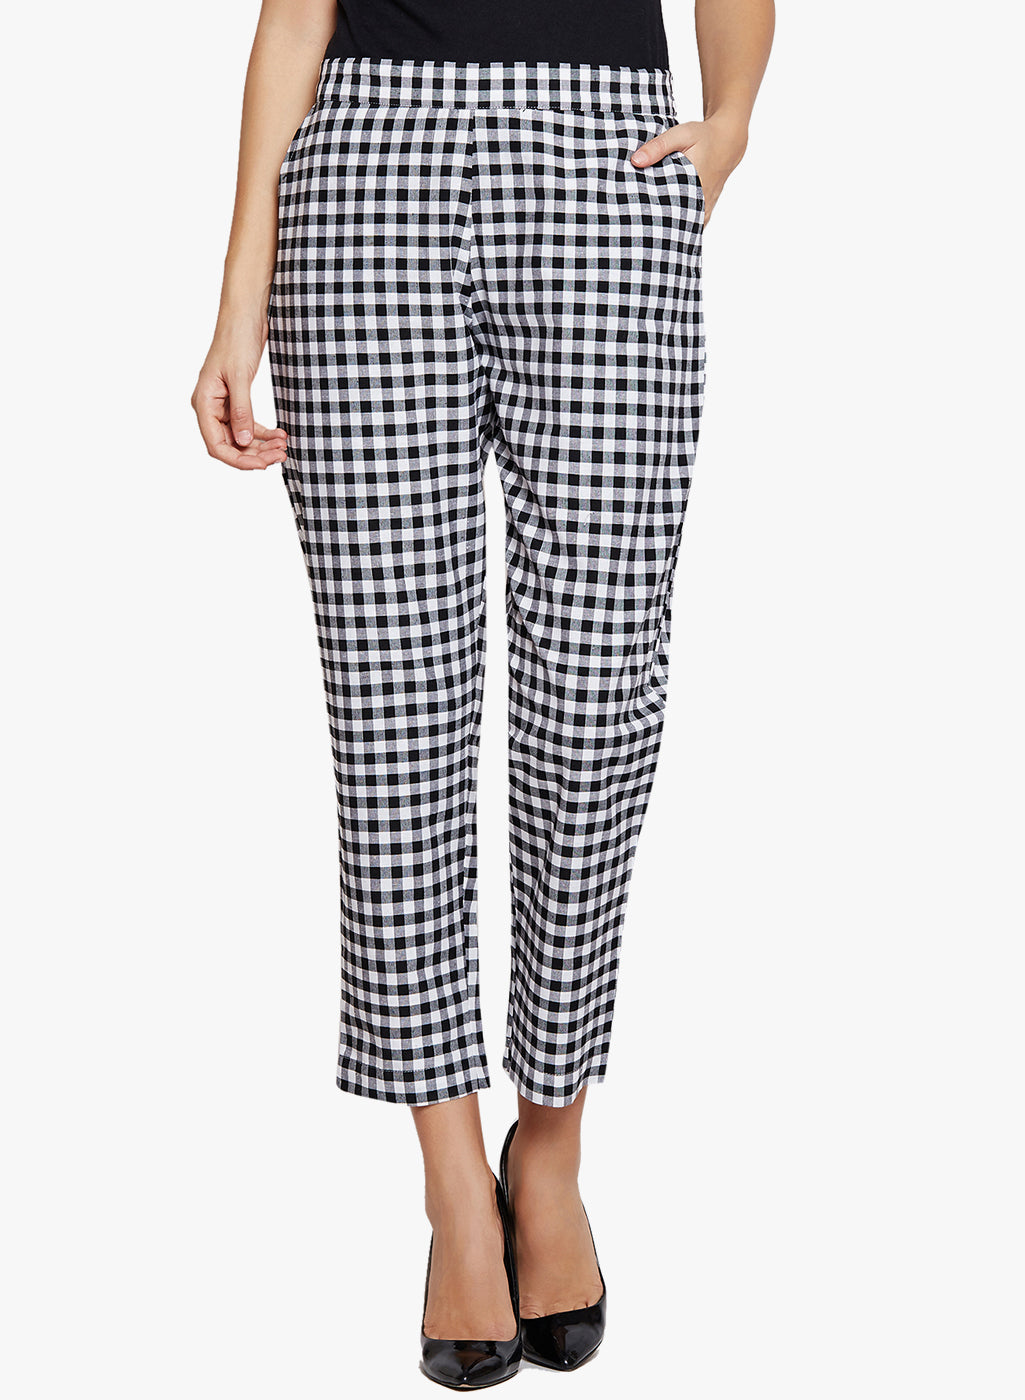 black and white check pants for ladies